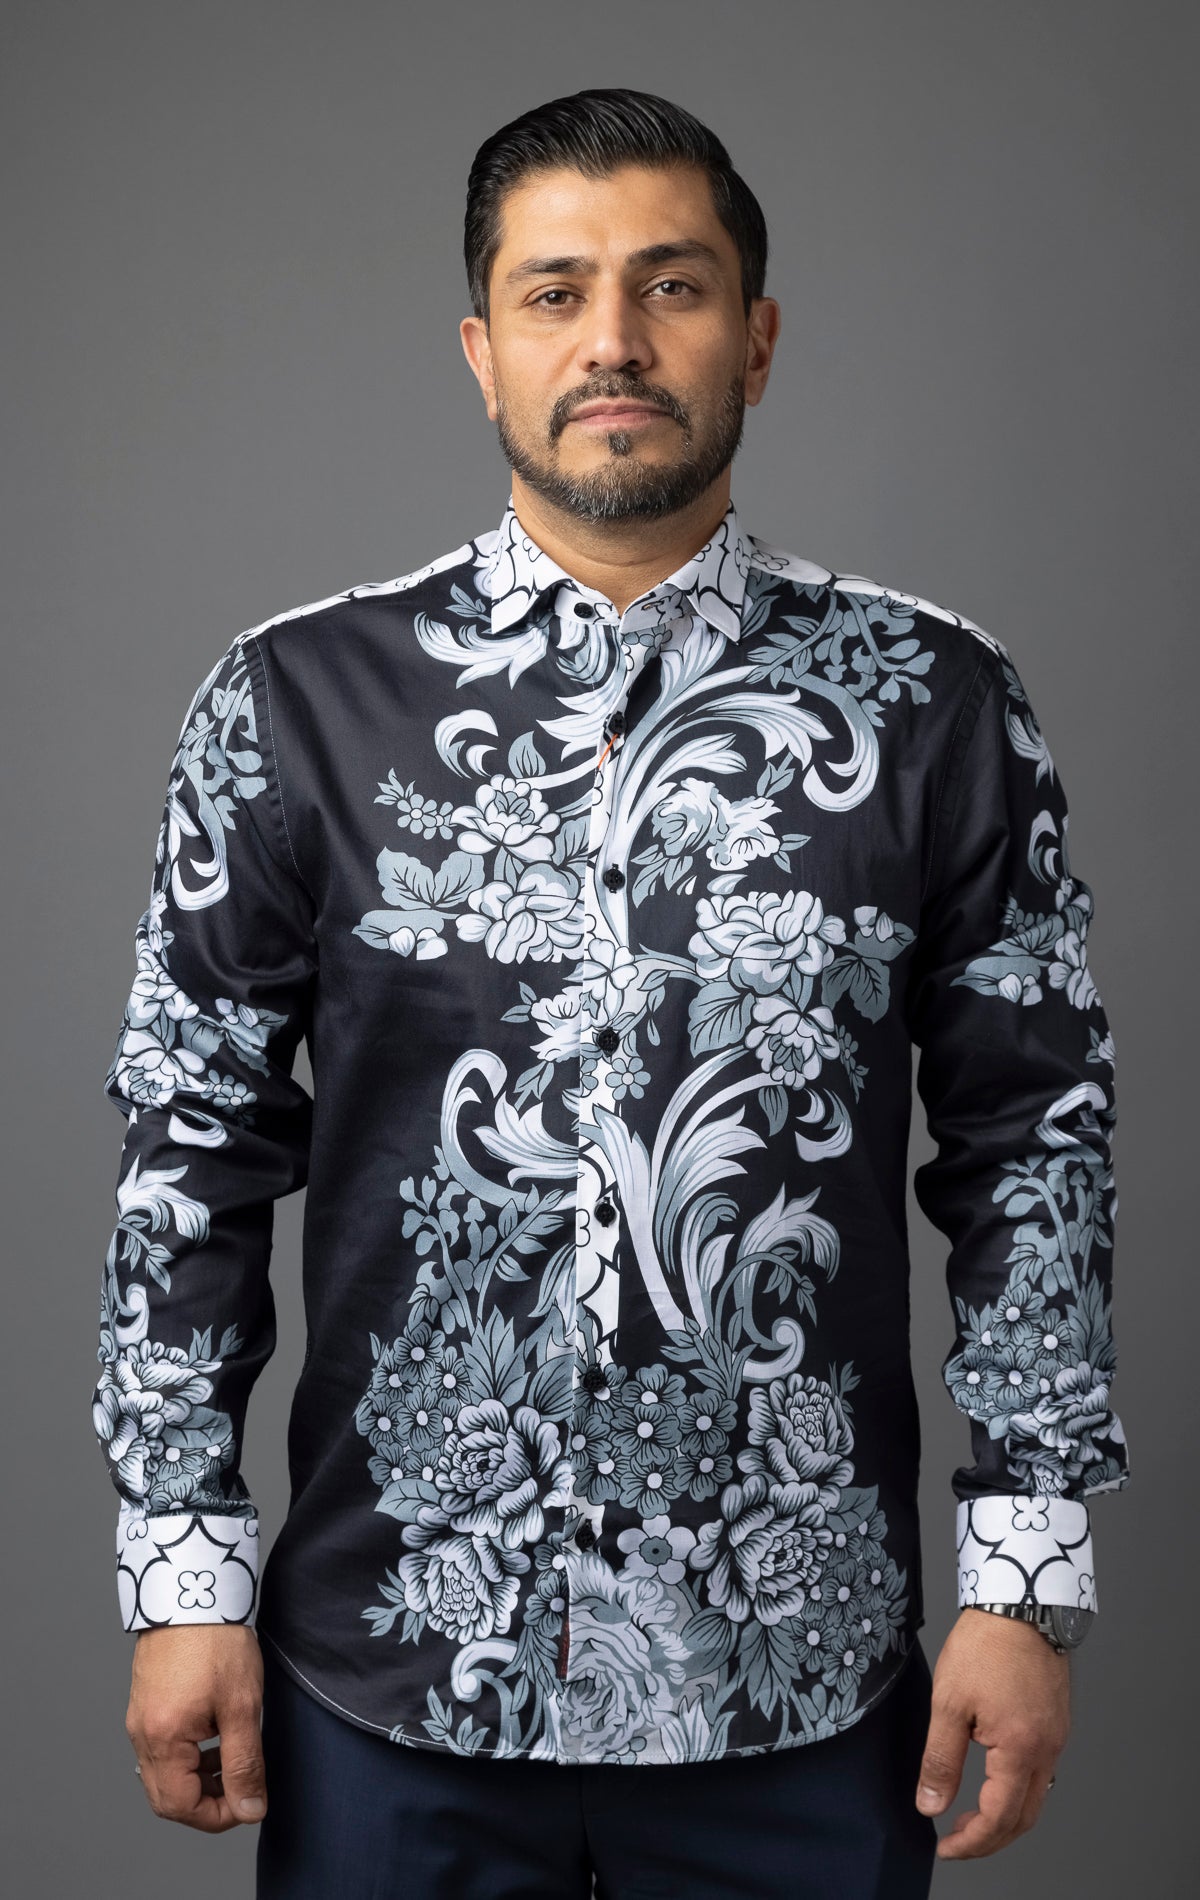 Designer button down long sleeve dress shirt. This shirt features a Slim Fit and is made with high-quality materials for superior feel and long-lasting wear.